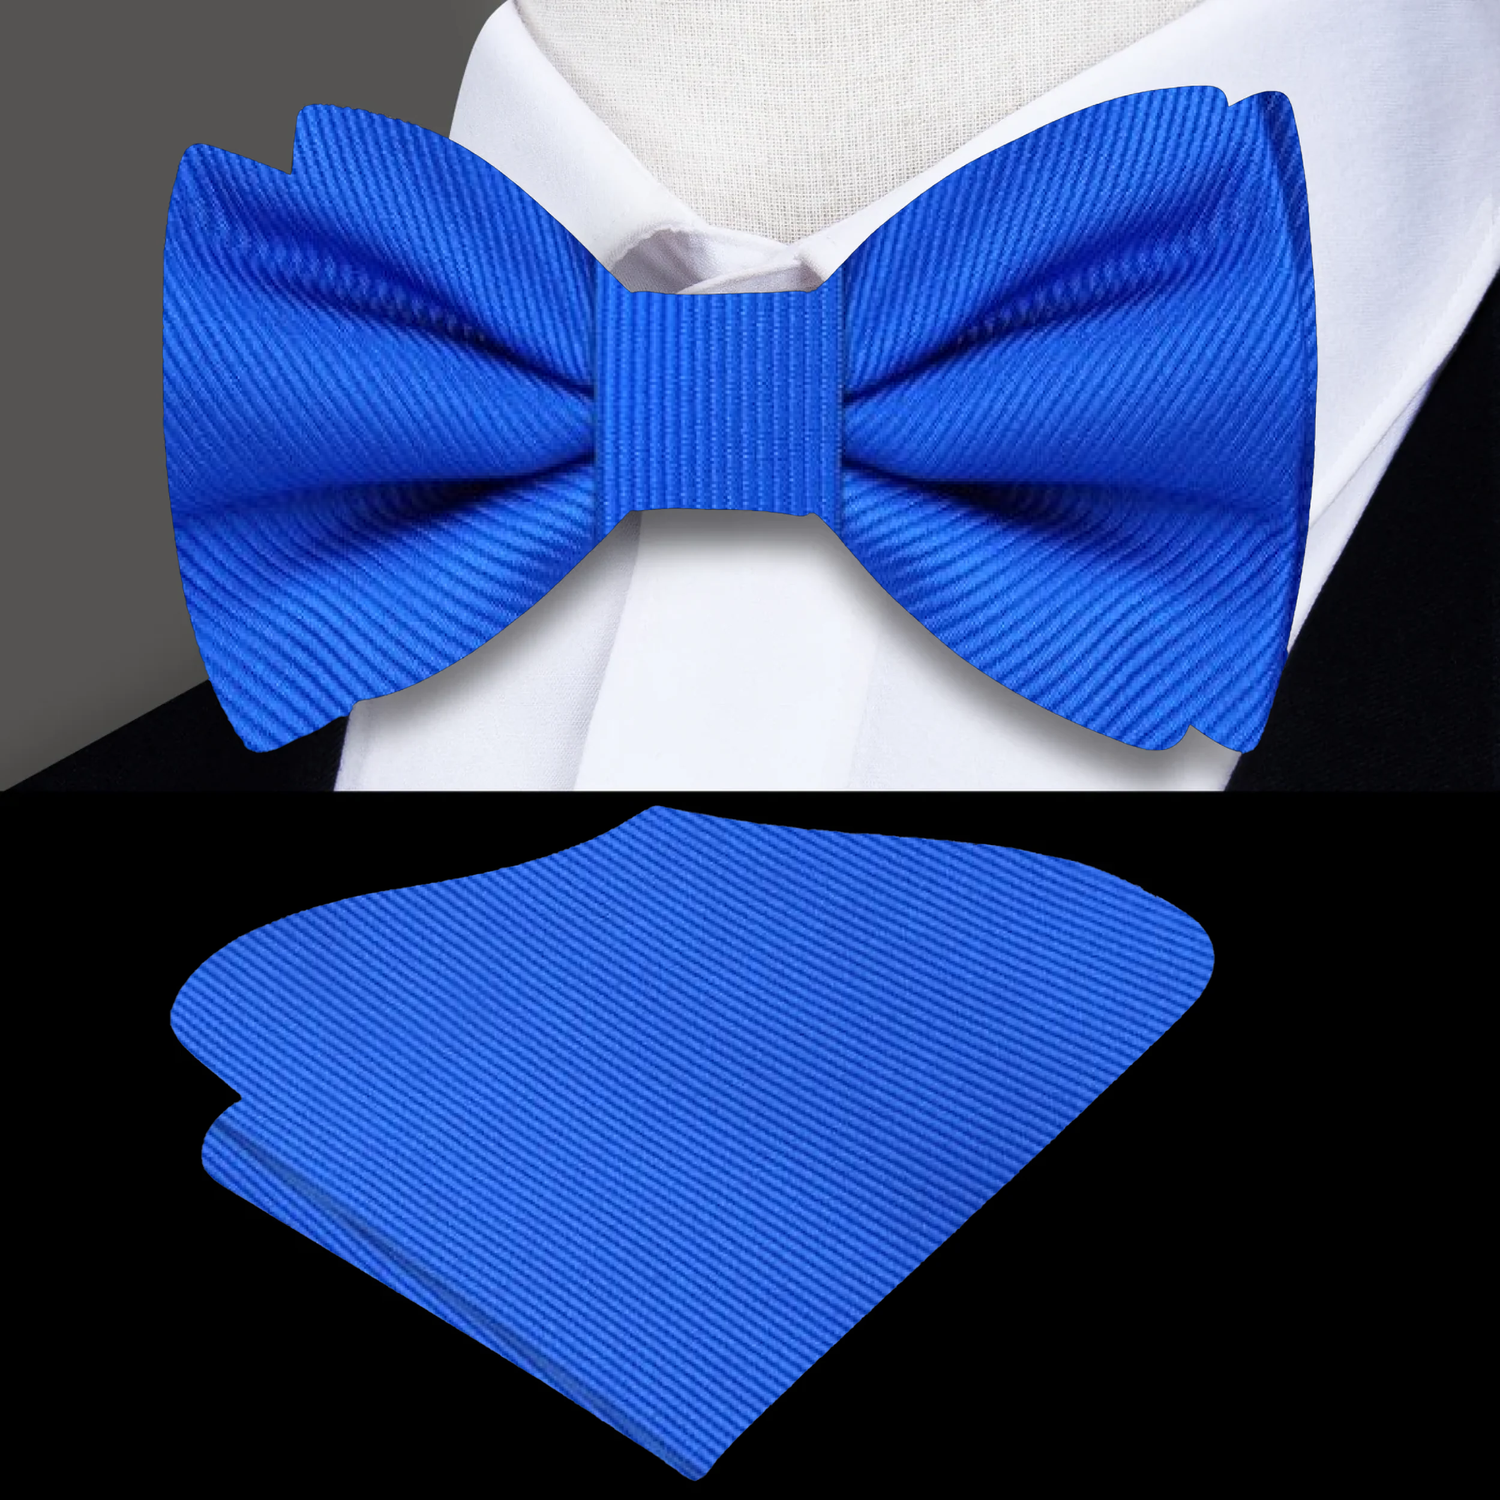 A Solid Sky Blue Bow Tie With Lined Texture, Matching Pocket Square